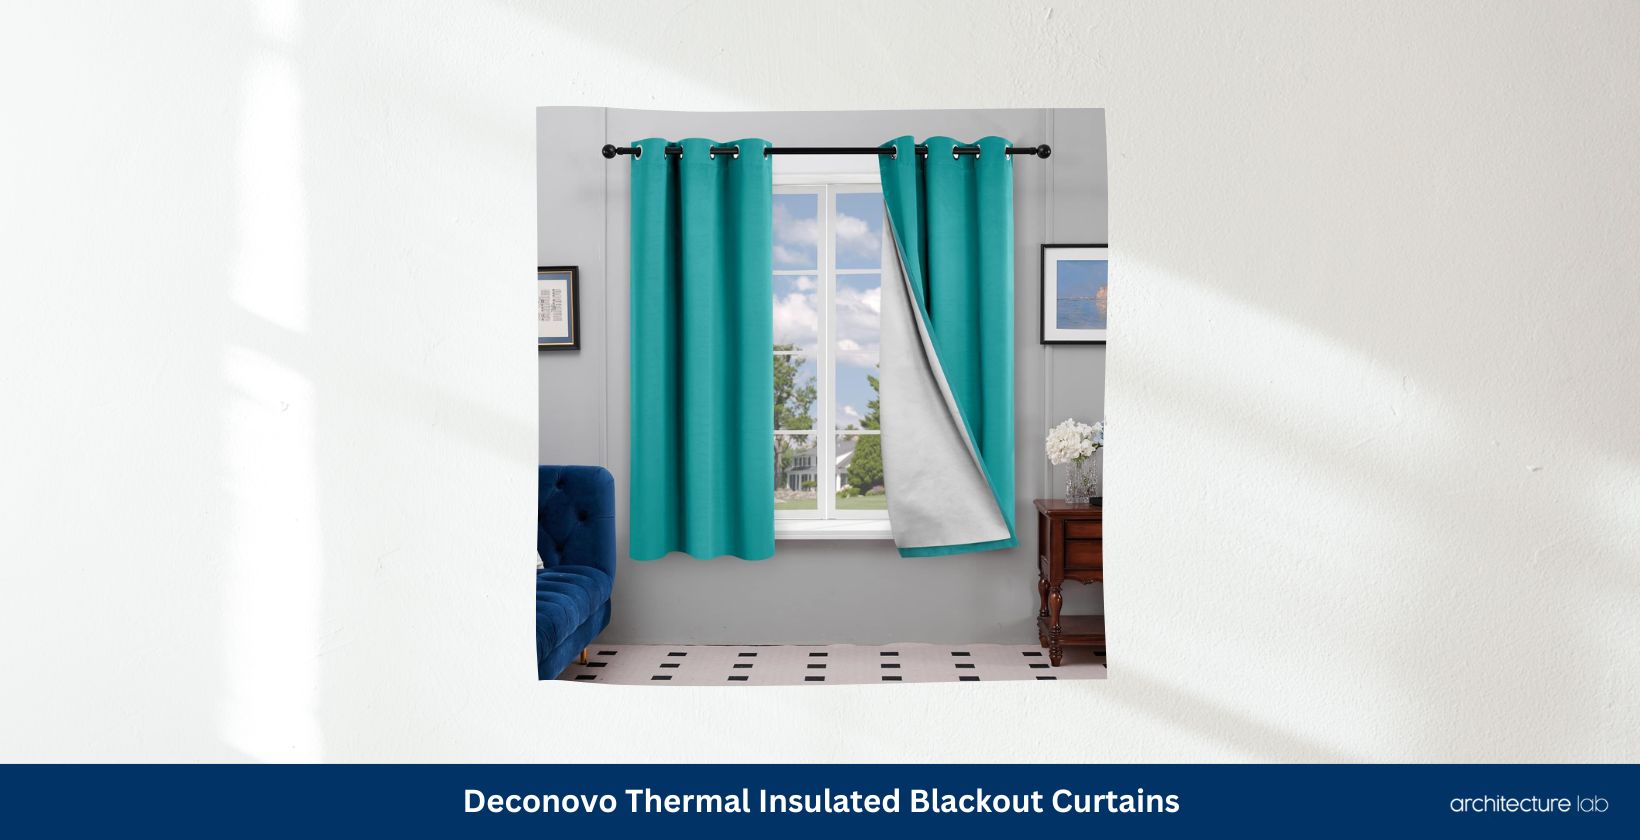 Deconovo thermal insulated blackout curtains